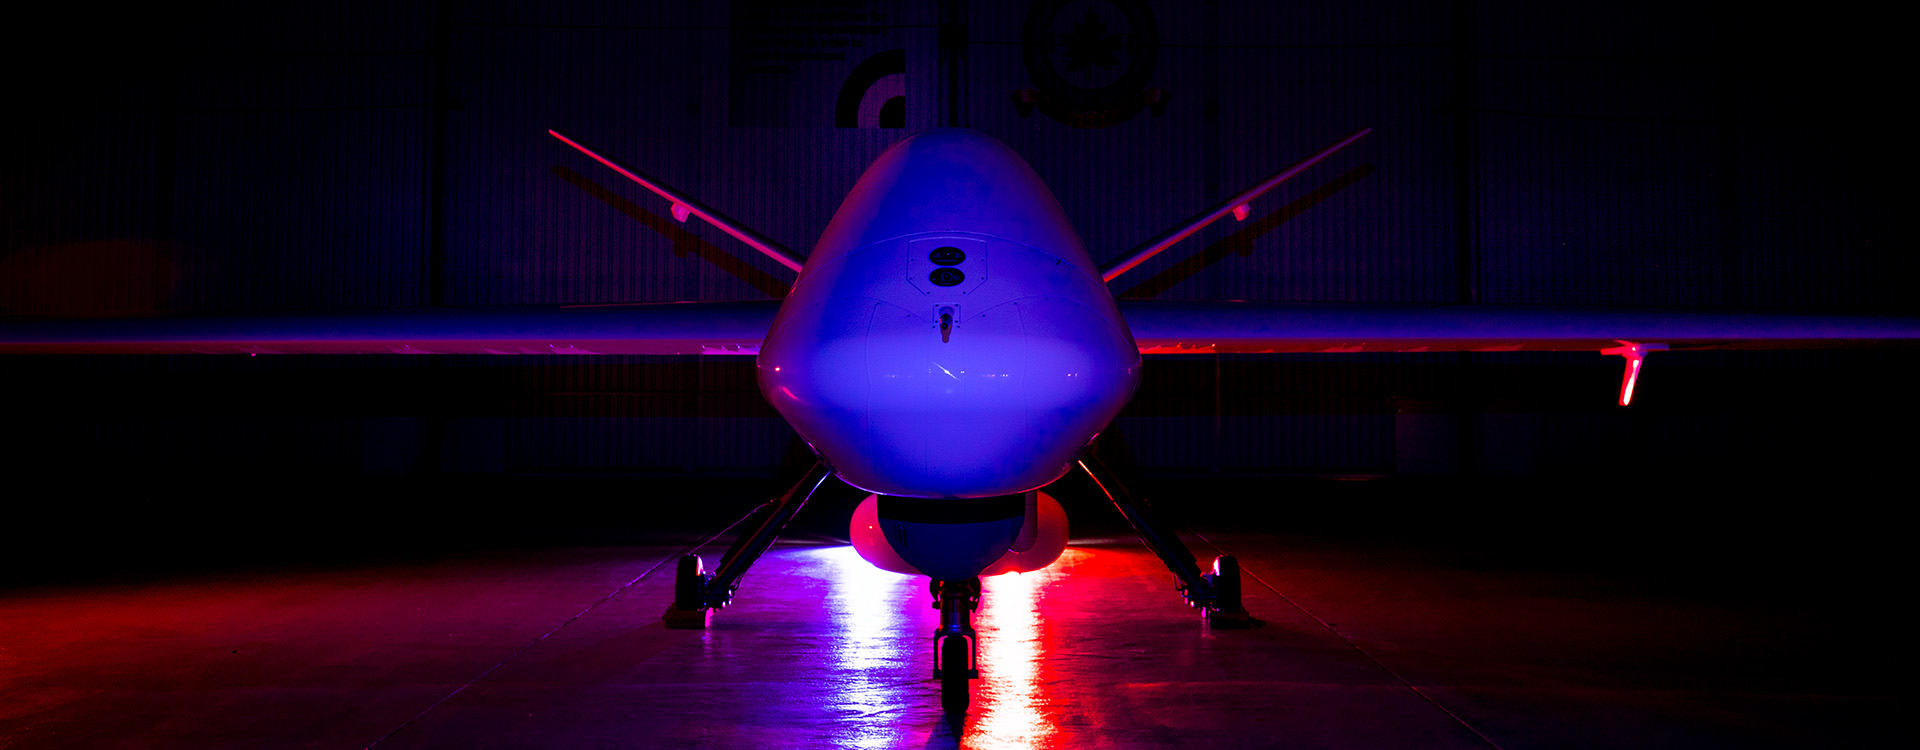 Protector aircraft on a dark runway facing forward with blue and red lighting behind it.